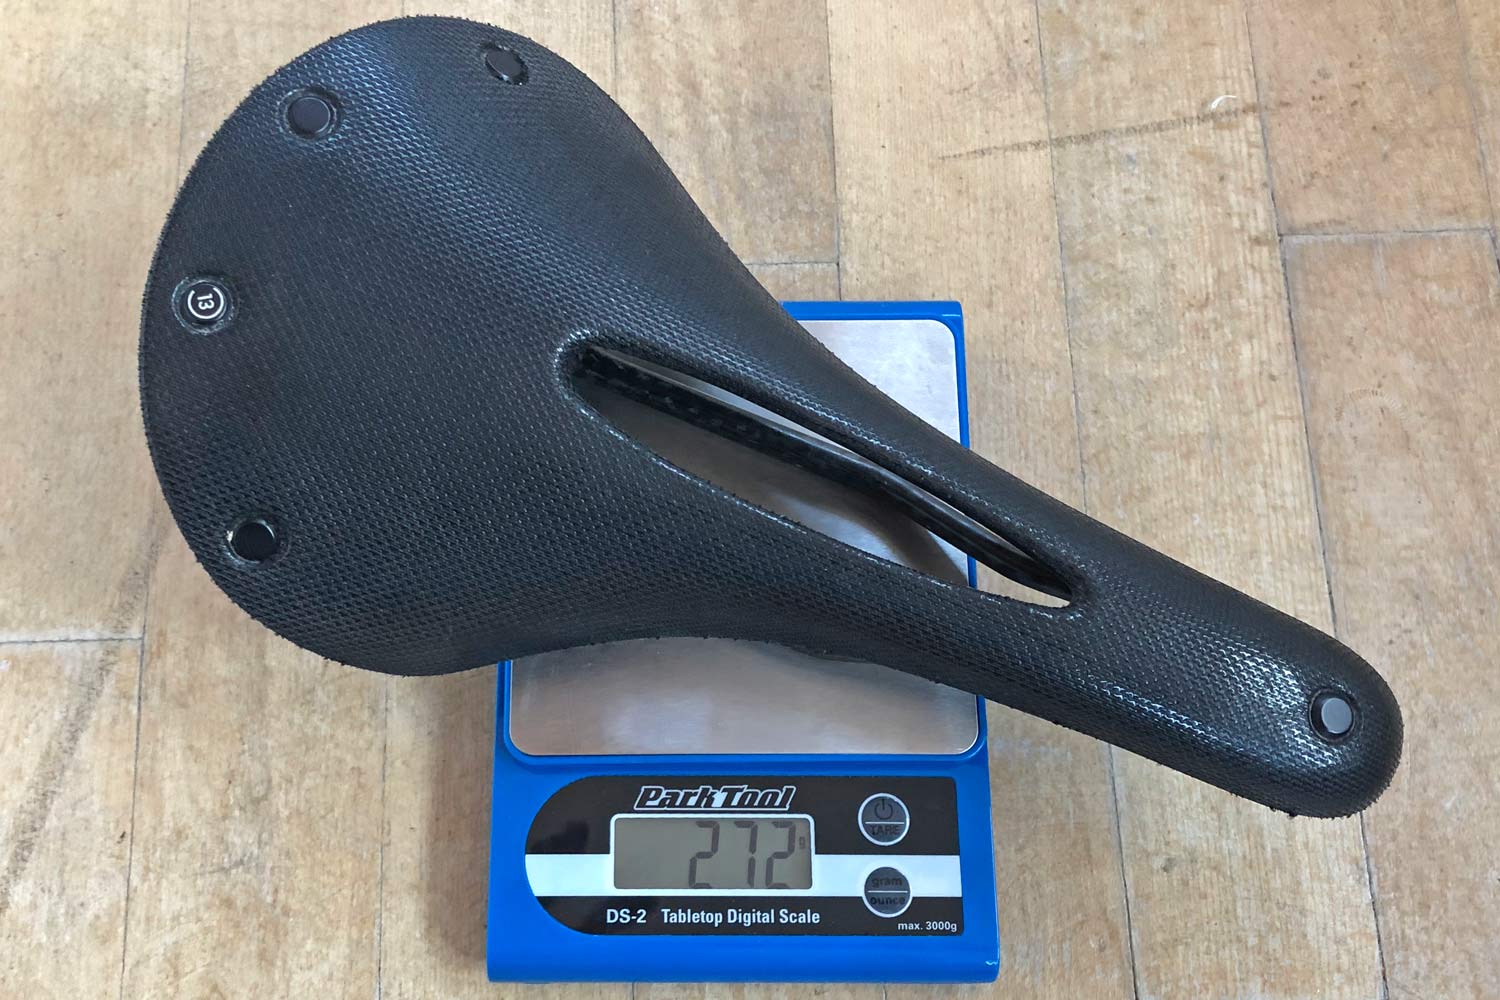 Brooks Cambium C13 All-Weather saddle_waterproof rubber nylon carbon-railed lightweight performance bicycle saddle 272g actual weight